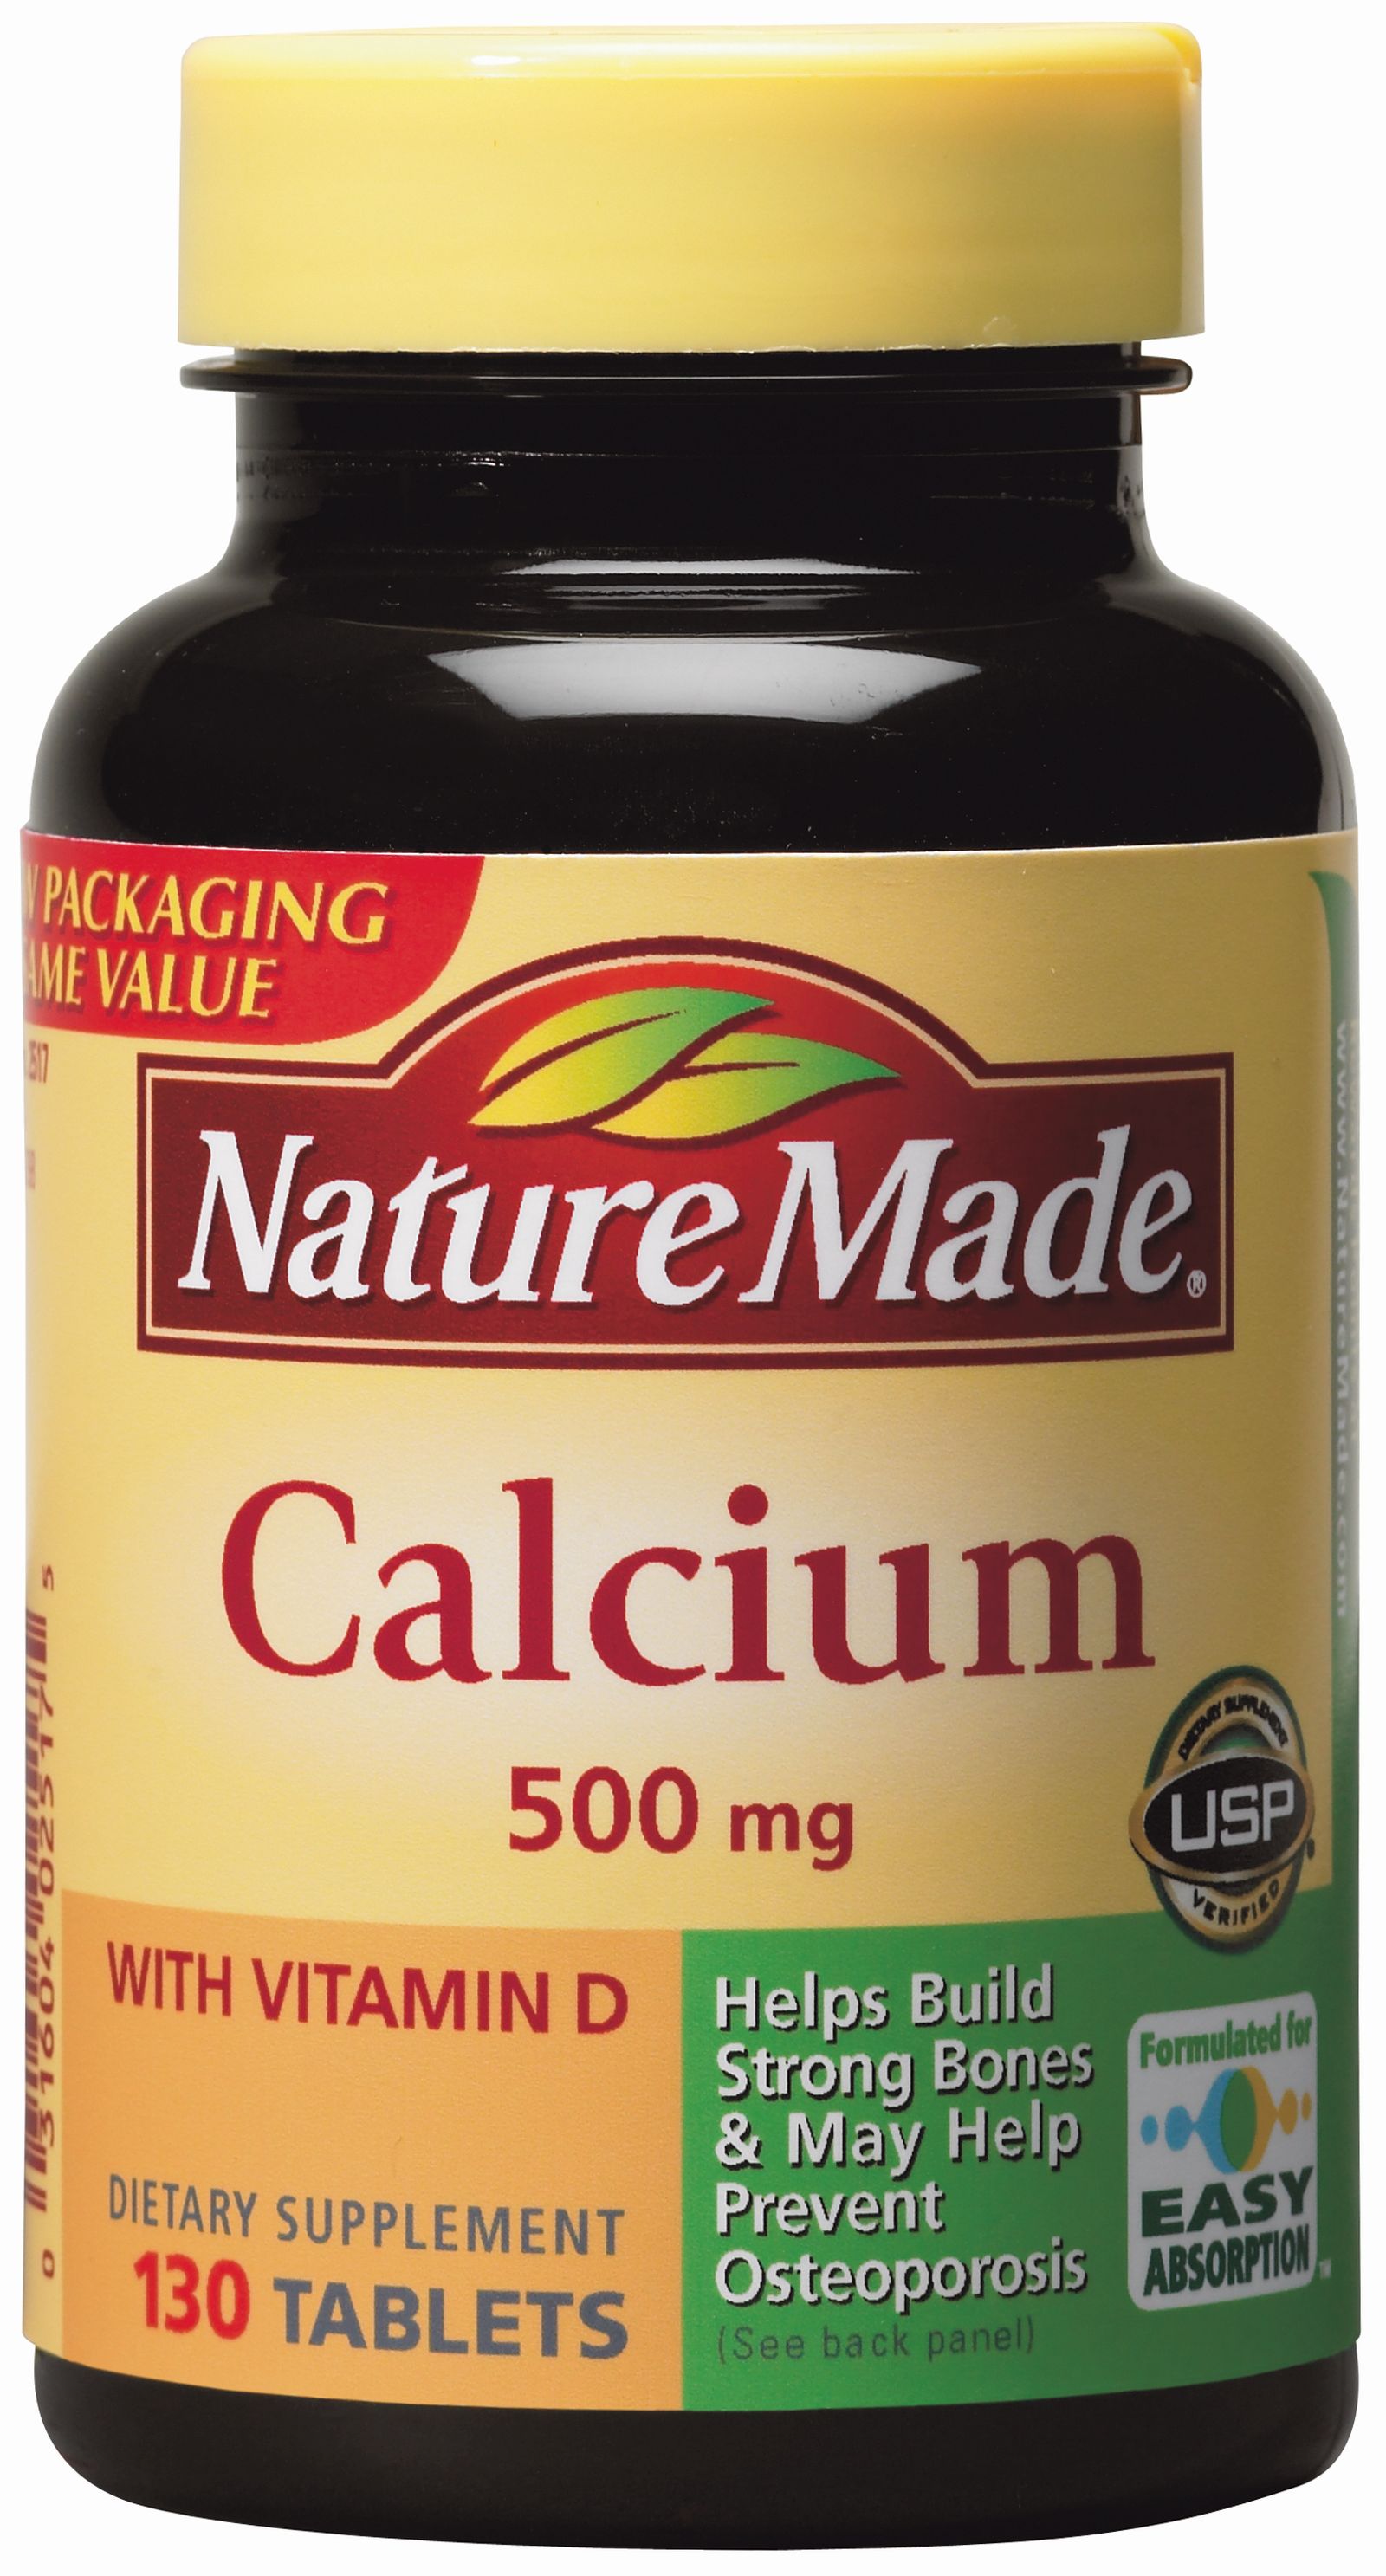 Nature Made Calcium 500 mg with Vitamin D, 130 Tablets